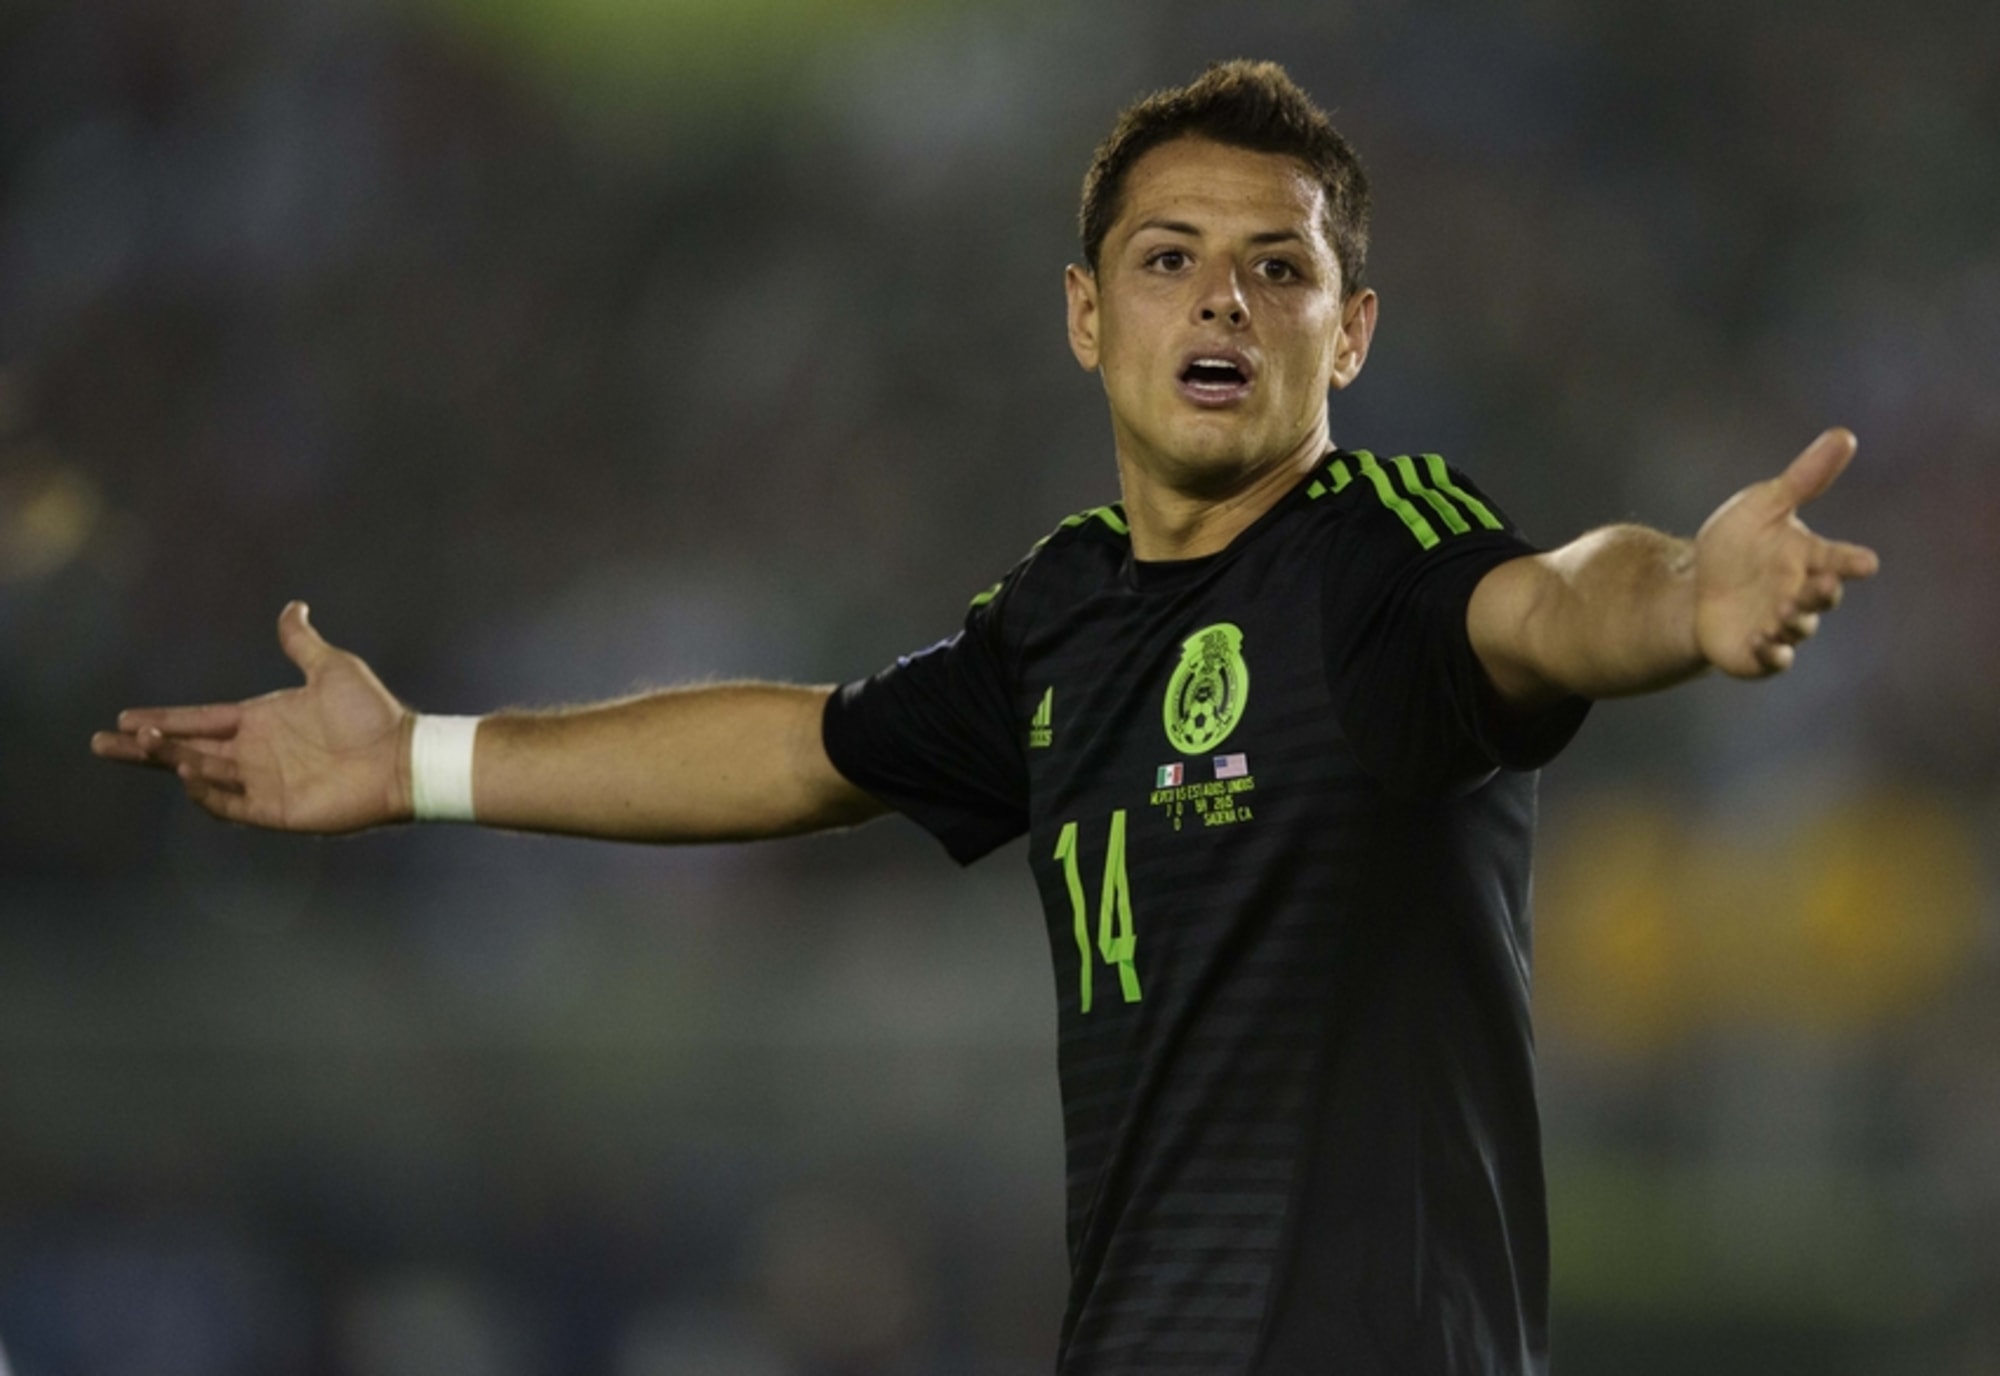 Mexico striker Chicharito' has a complicated history with his